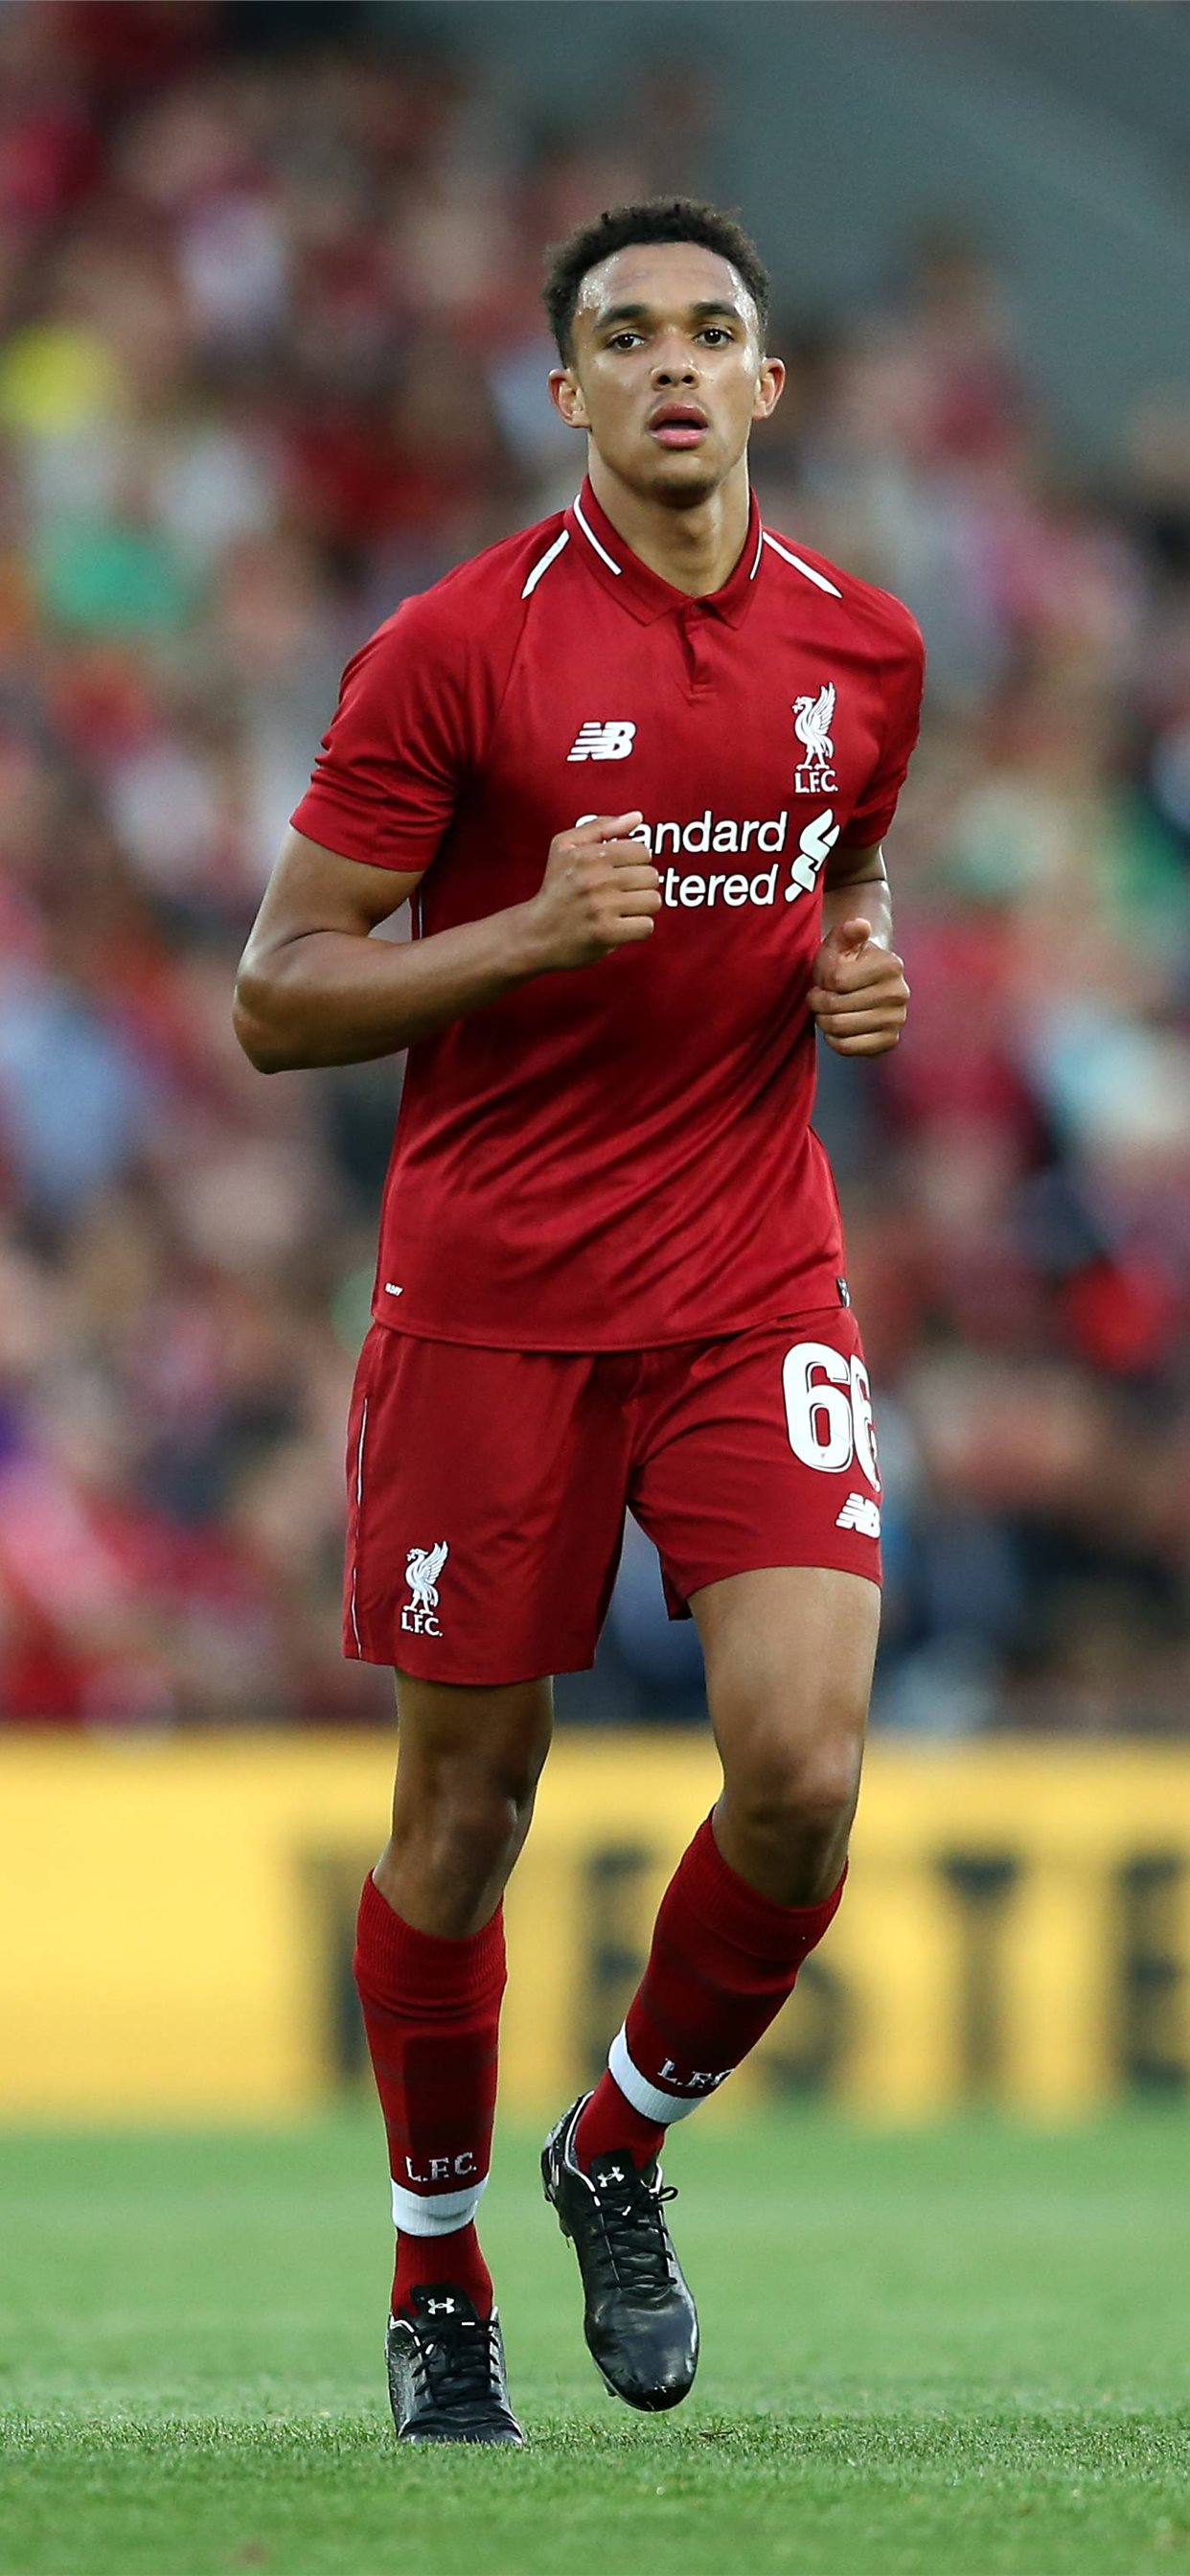 18340 Trent Alexander Arnold Photos  High Res Pictures  Getty Images